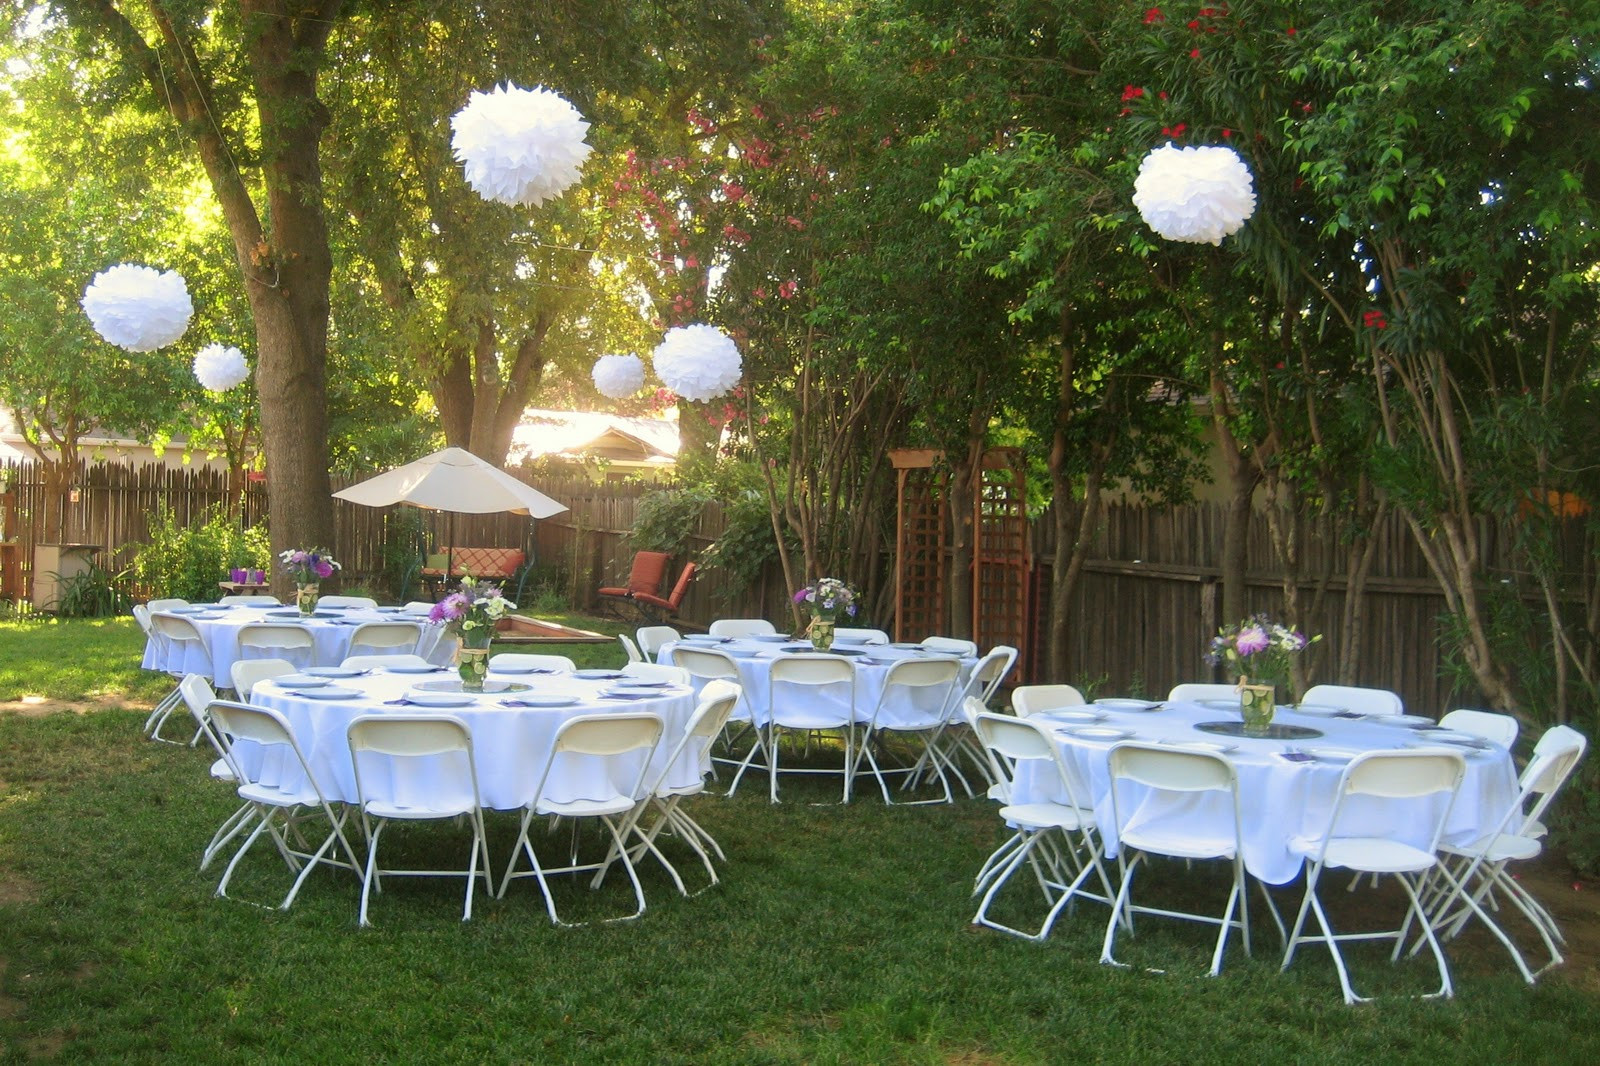 Backyard Engagement Party Decorating Ideas
 A resting place for pleted Projects Backyard Bridal